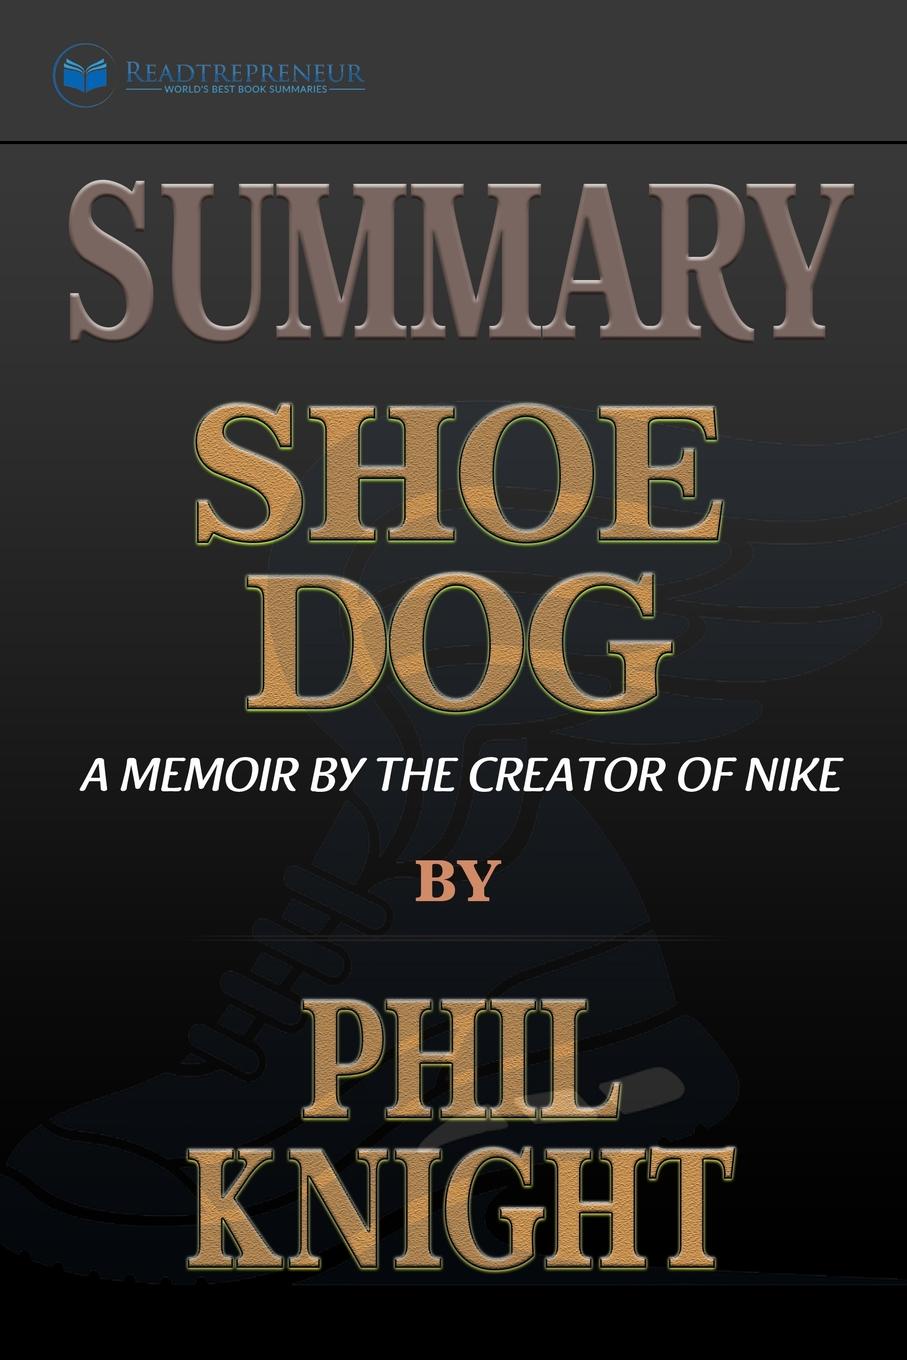 Summary of Shoe Dog. A Memoir by the Creator of Nike by Phil Knight